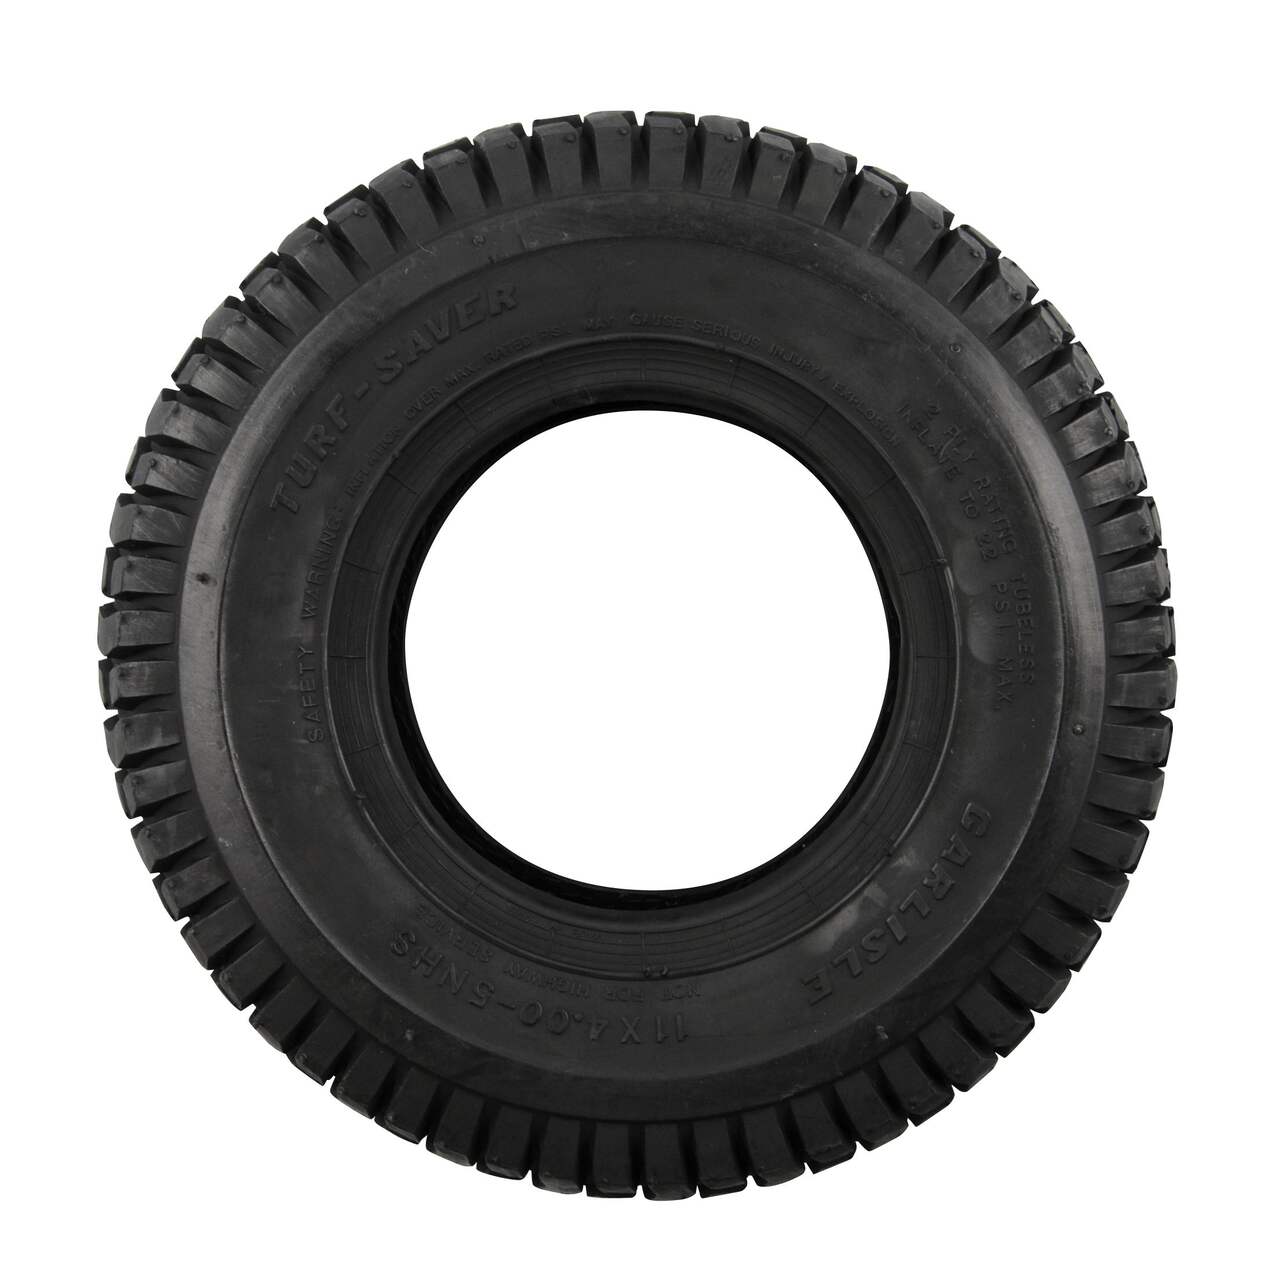 Atlas 2 Ply Lawn Tractor & ATV Replacement Tire, 11 x 4-5-in | Canadian Tire